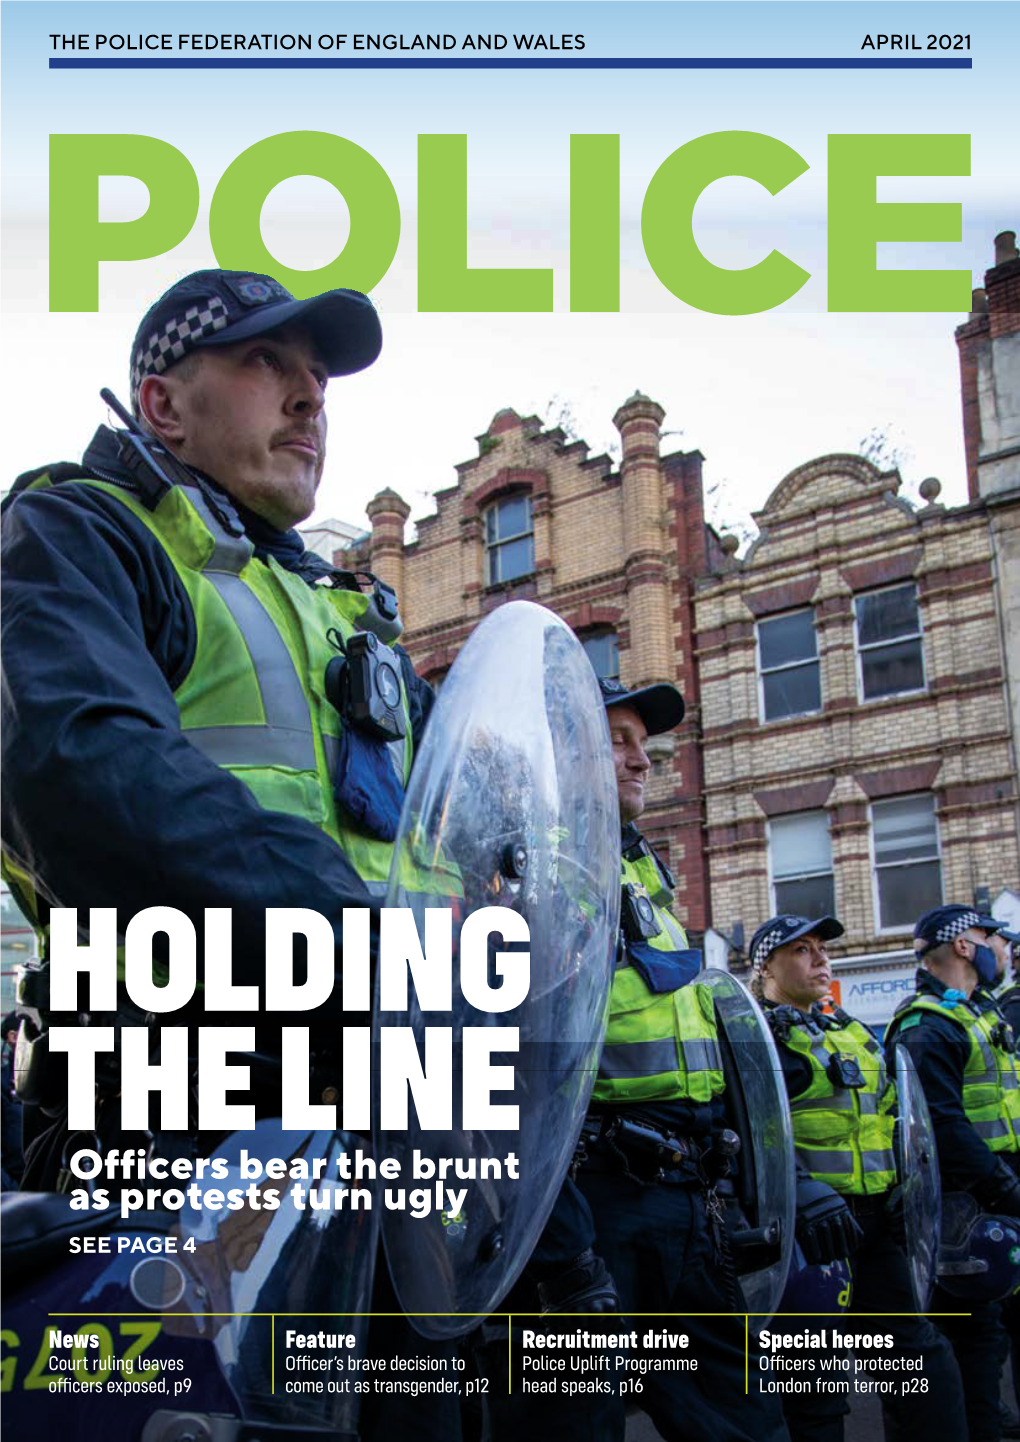 Officers Bear the Brunt As Protests Turn Ugly SEE PAGE 4